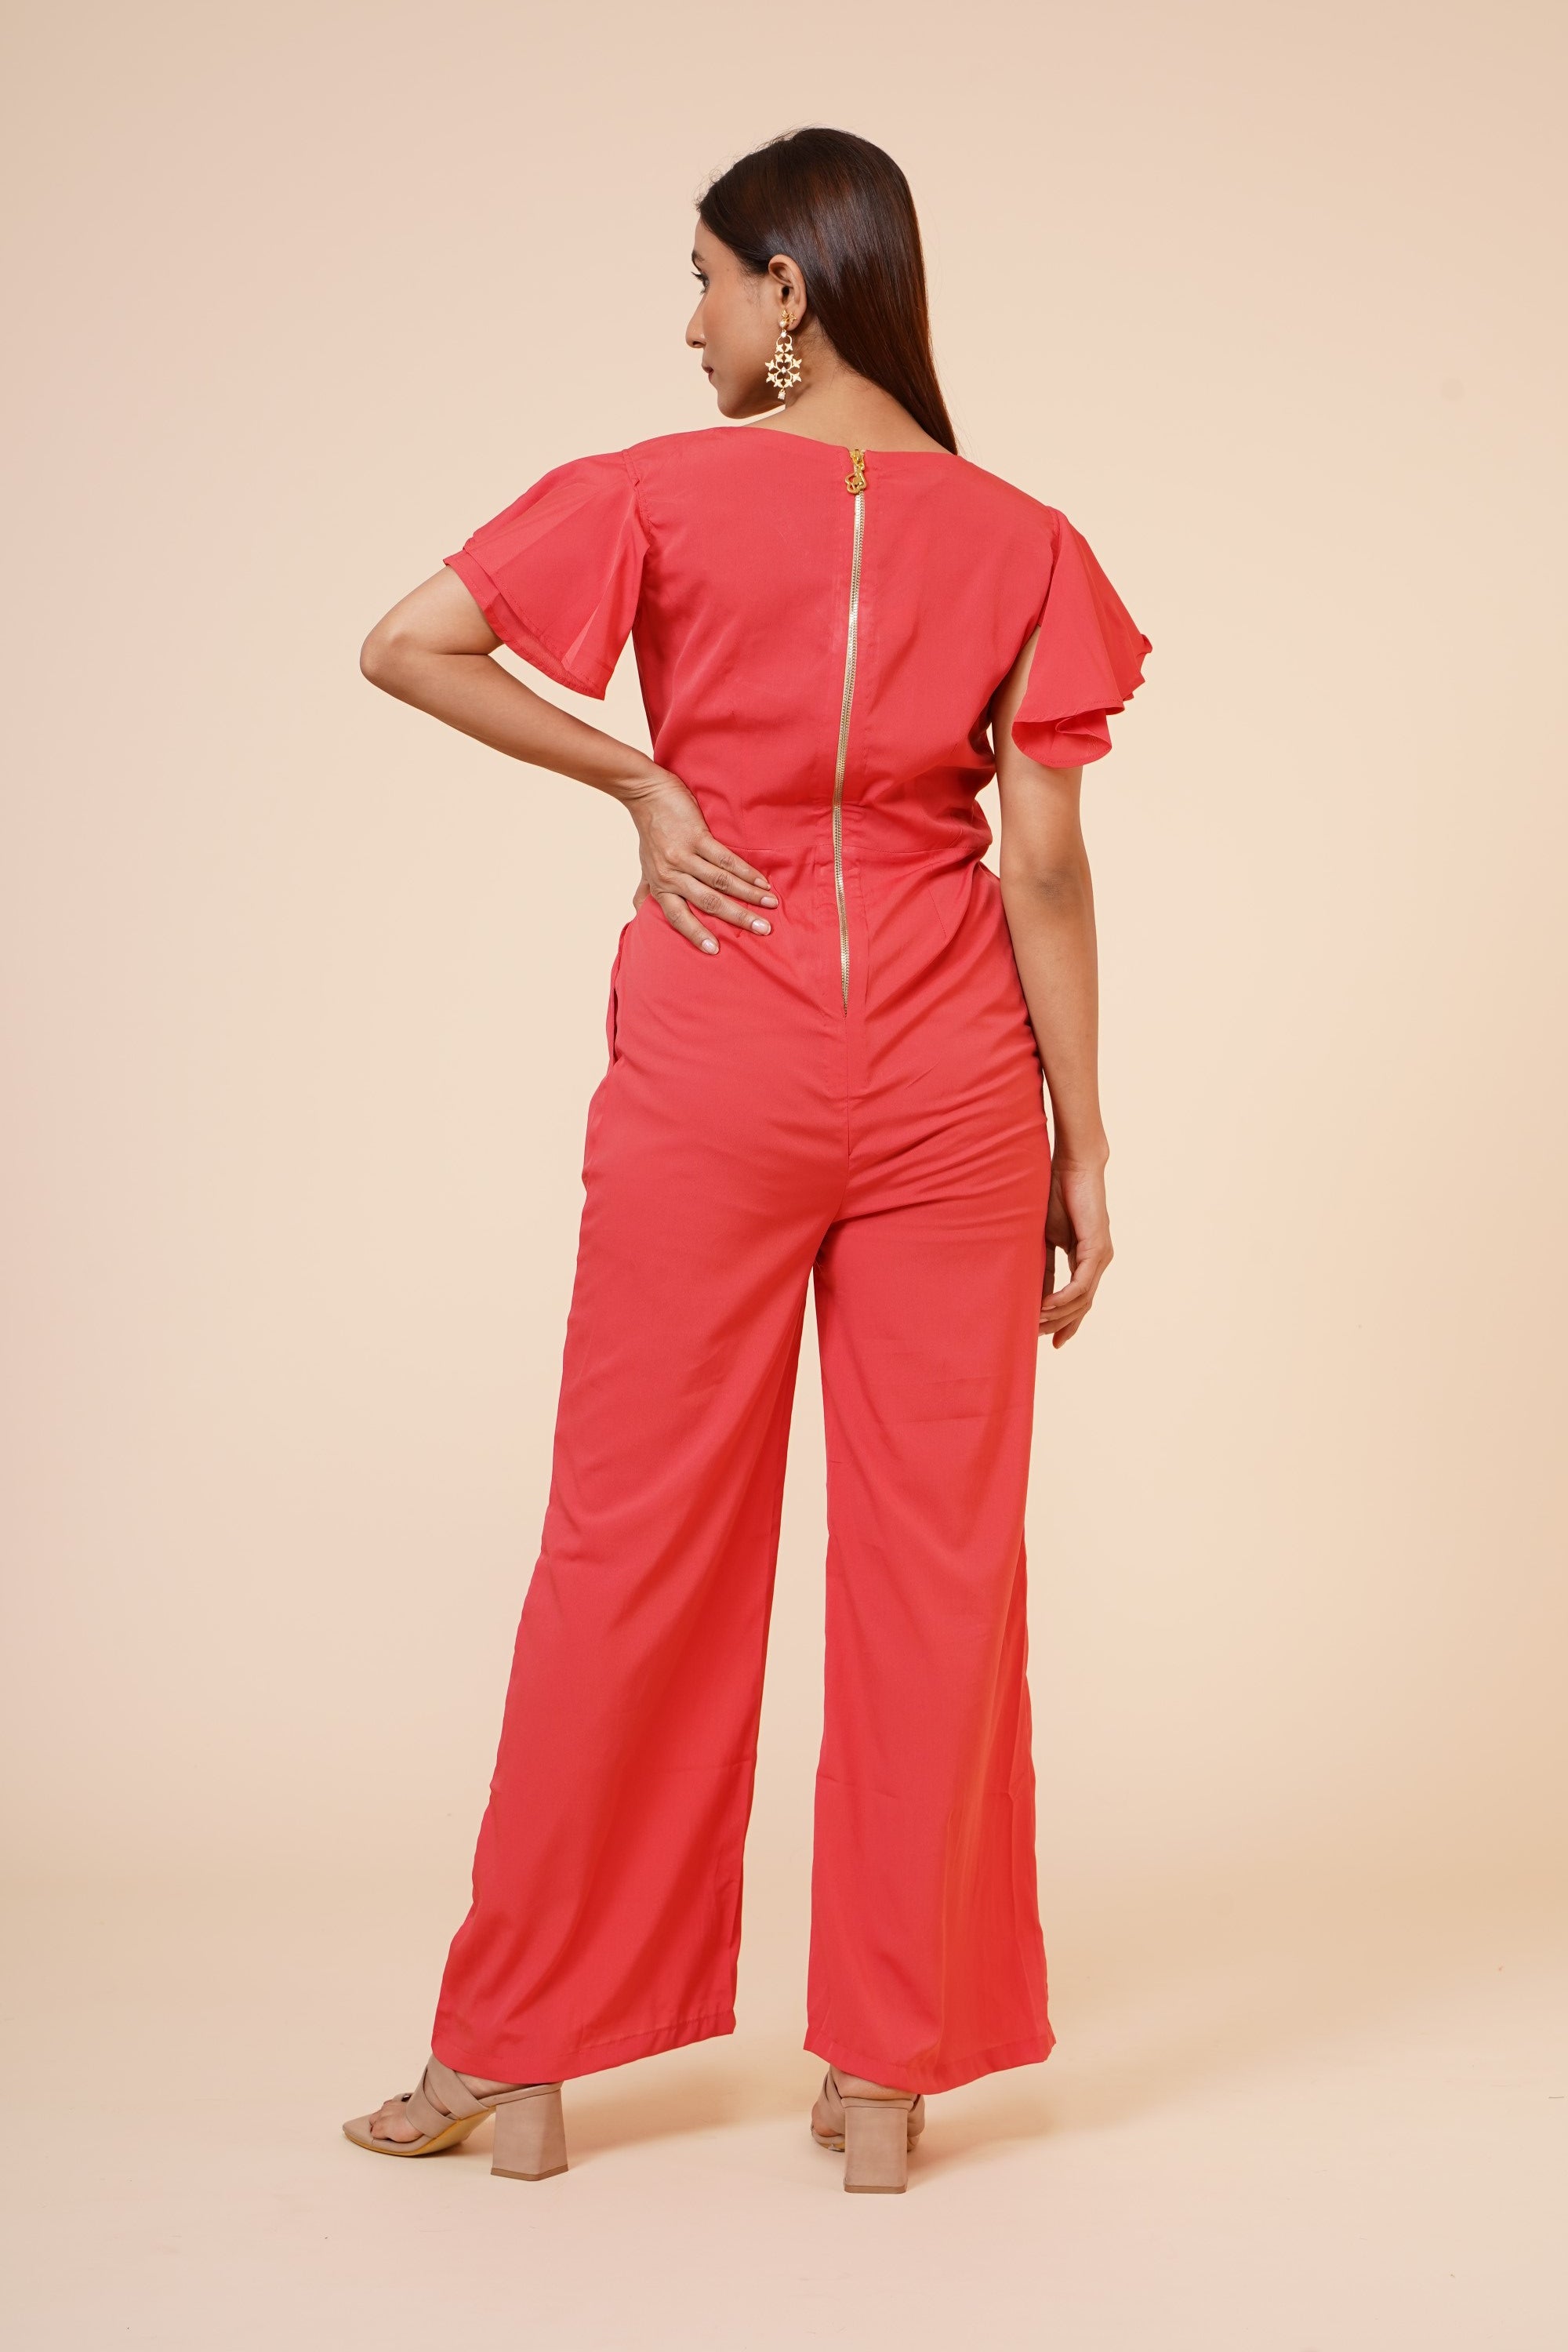 Women's Drape  Party/ Casual Jumpsuit In Peach - MIRACOLOS by Ruchi